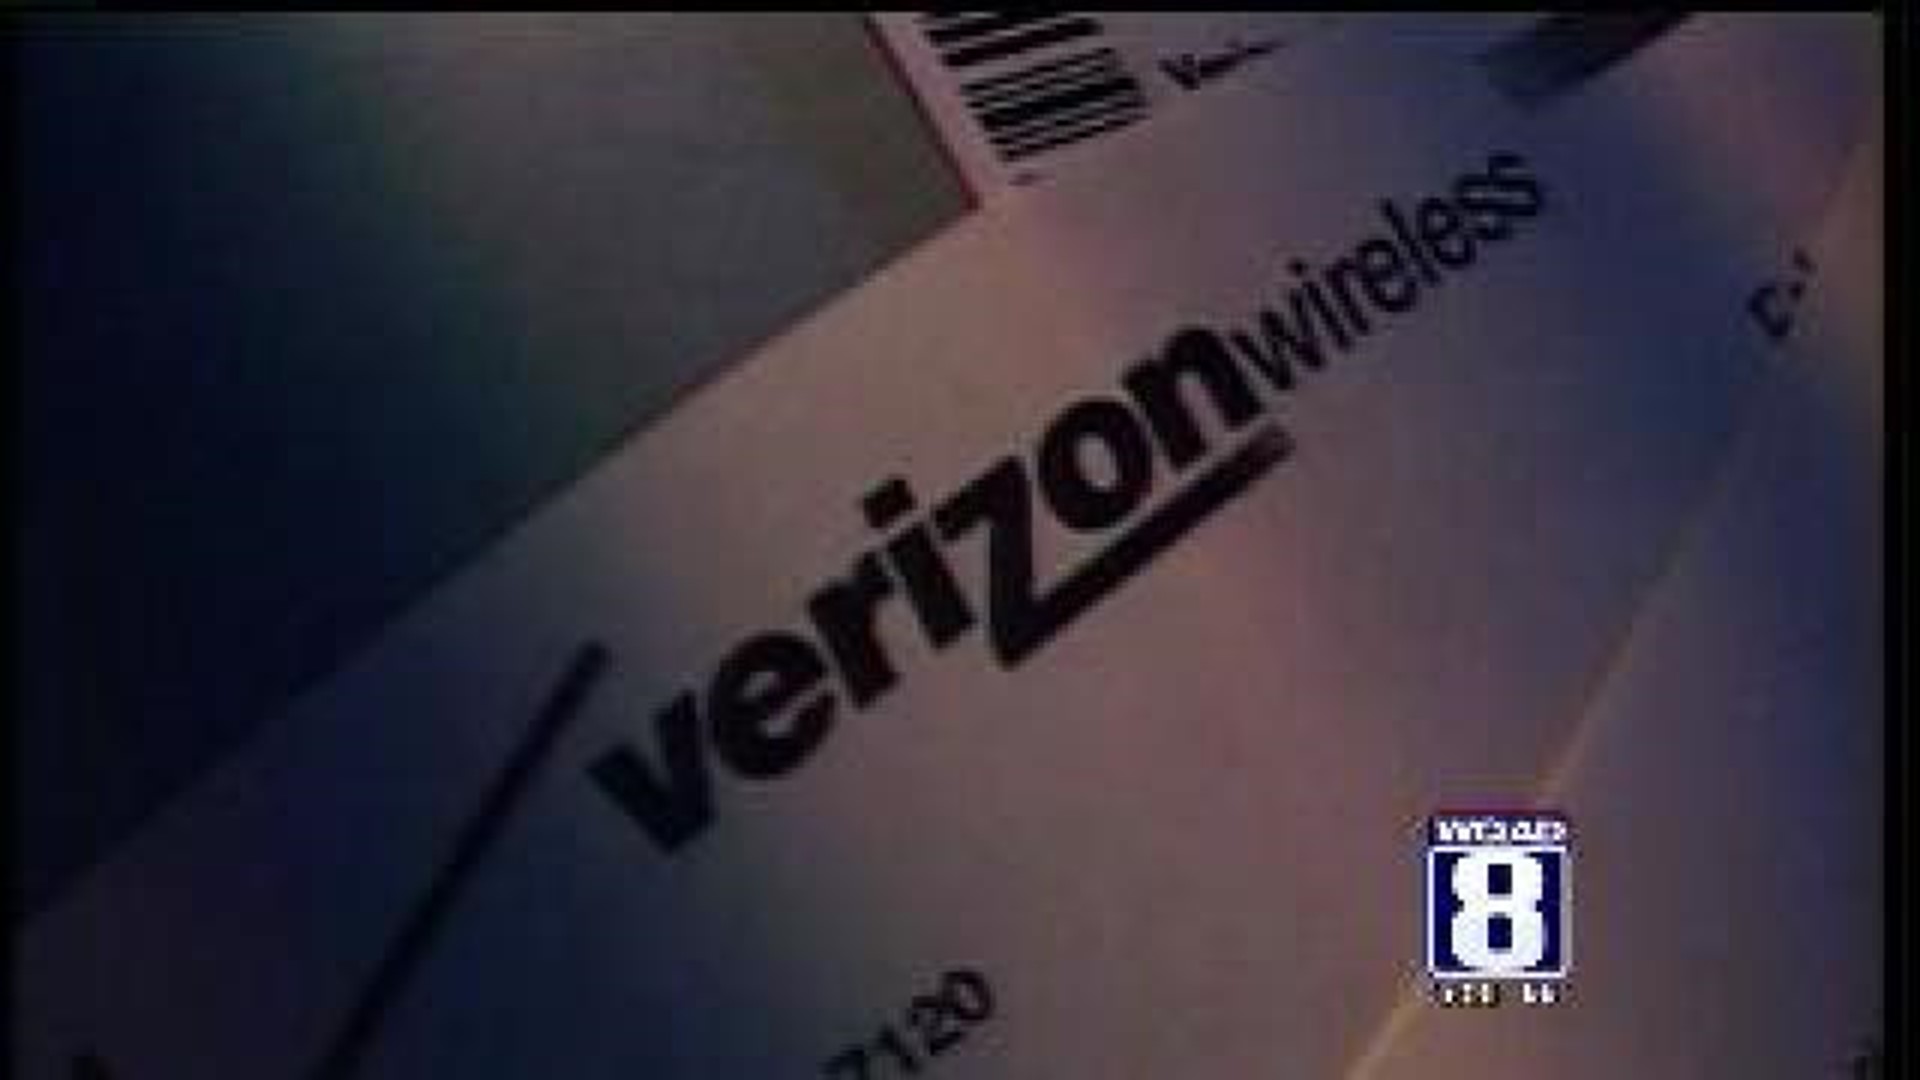 Verizon customers learned government has access to phone records